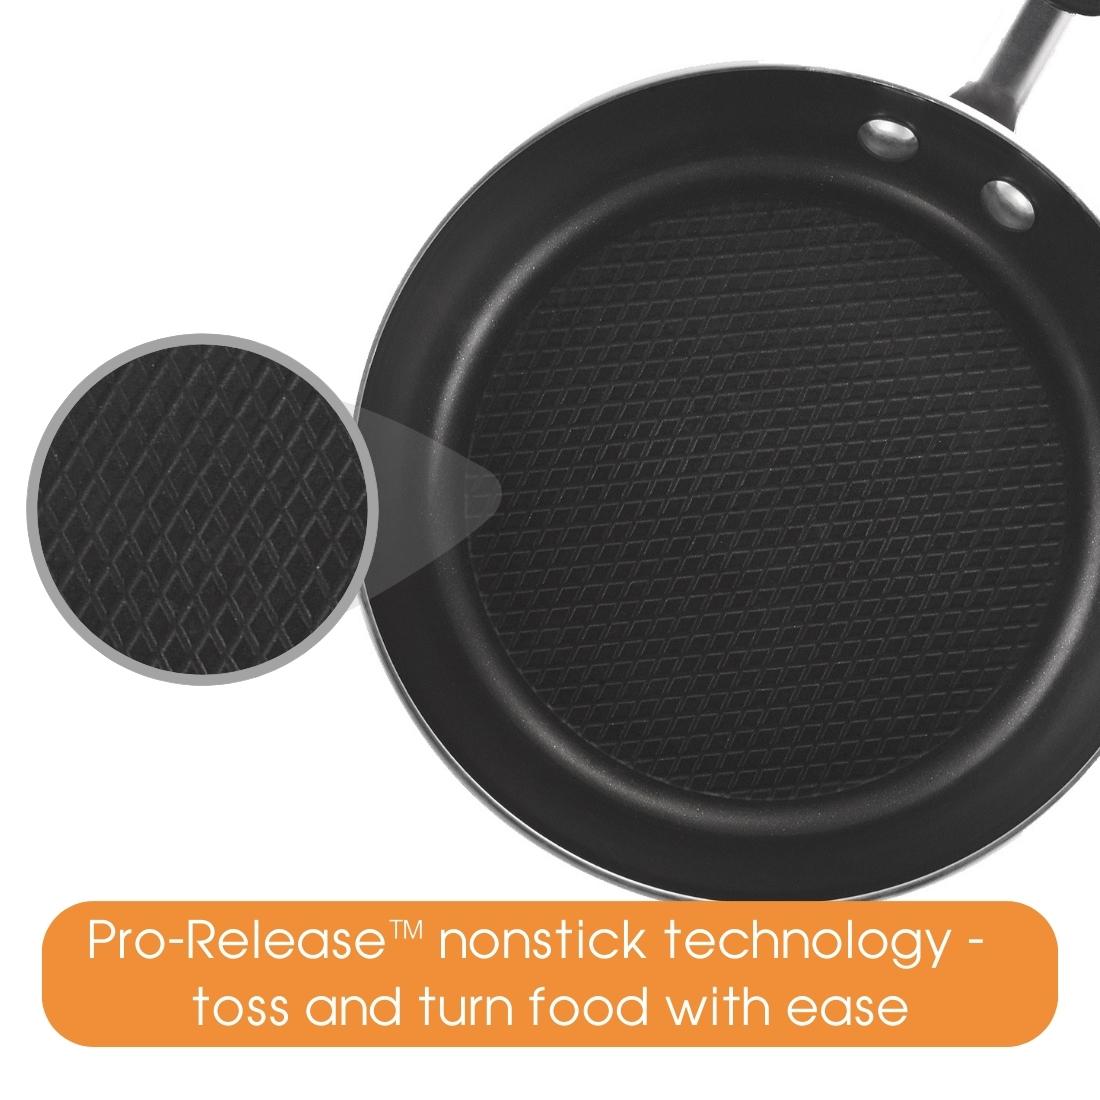 RACO Foundations Nonstick Induction Frypan 26cm